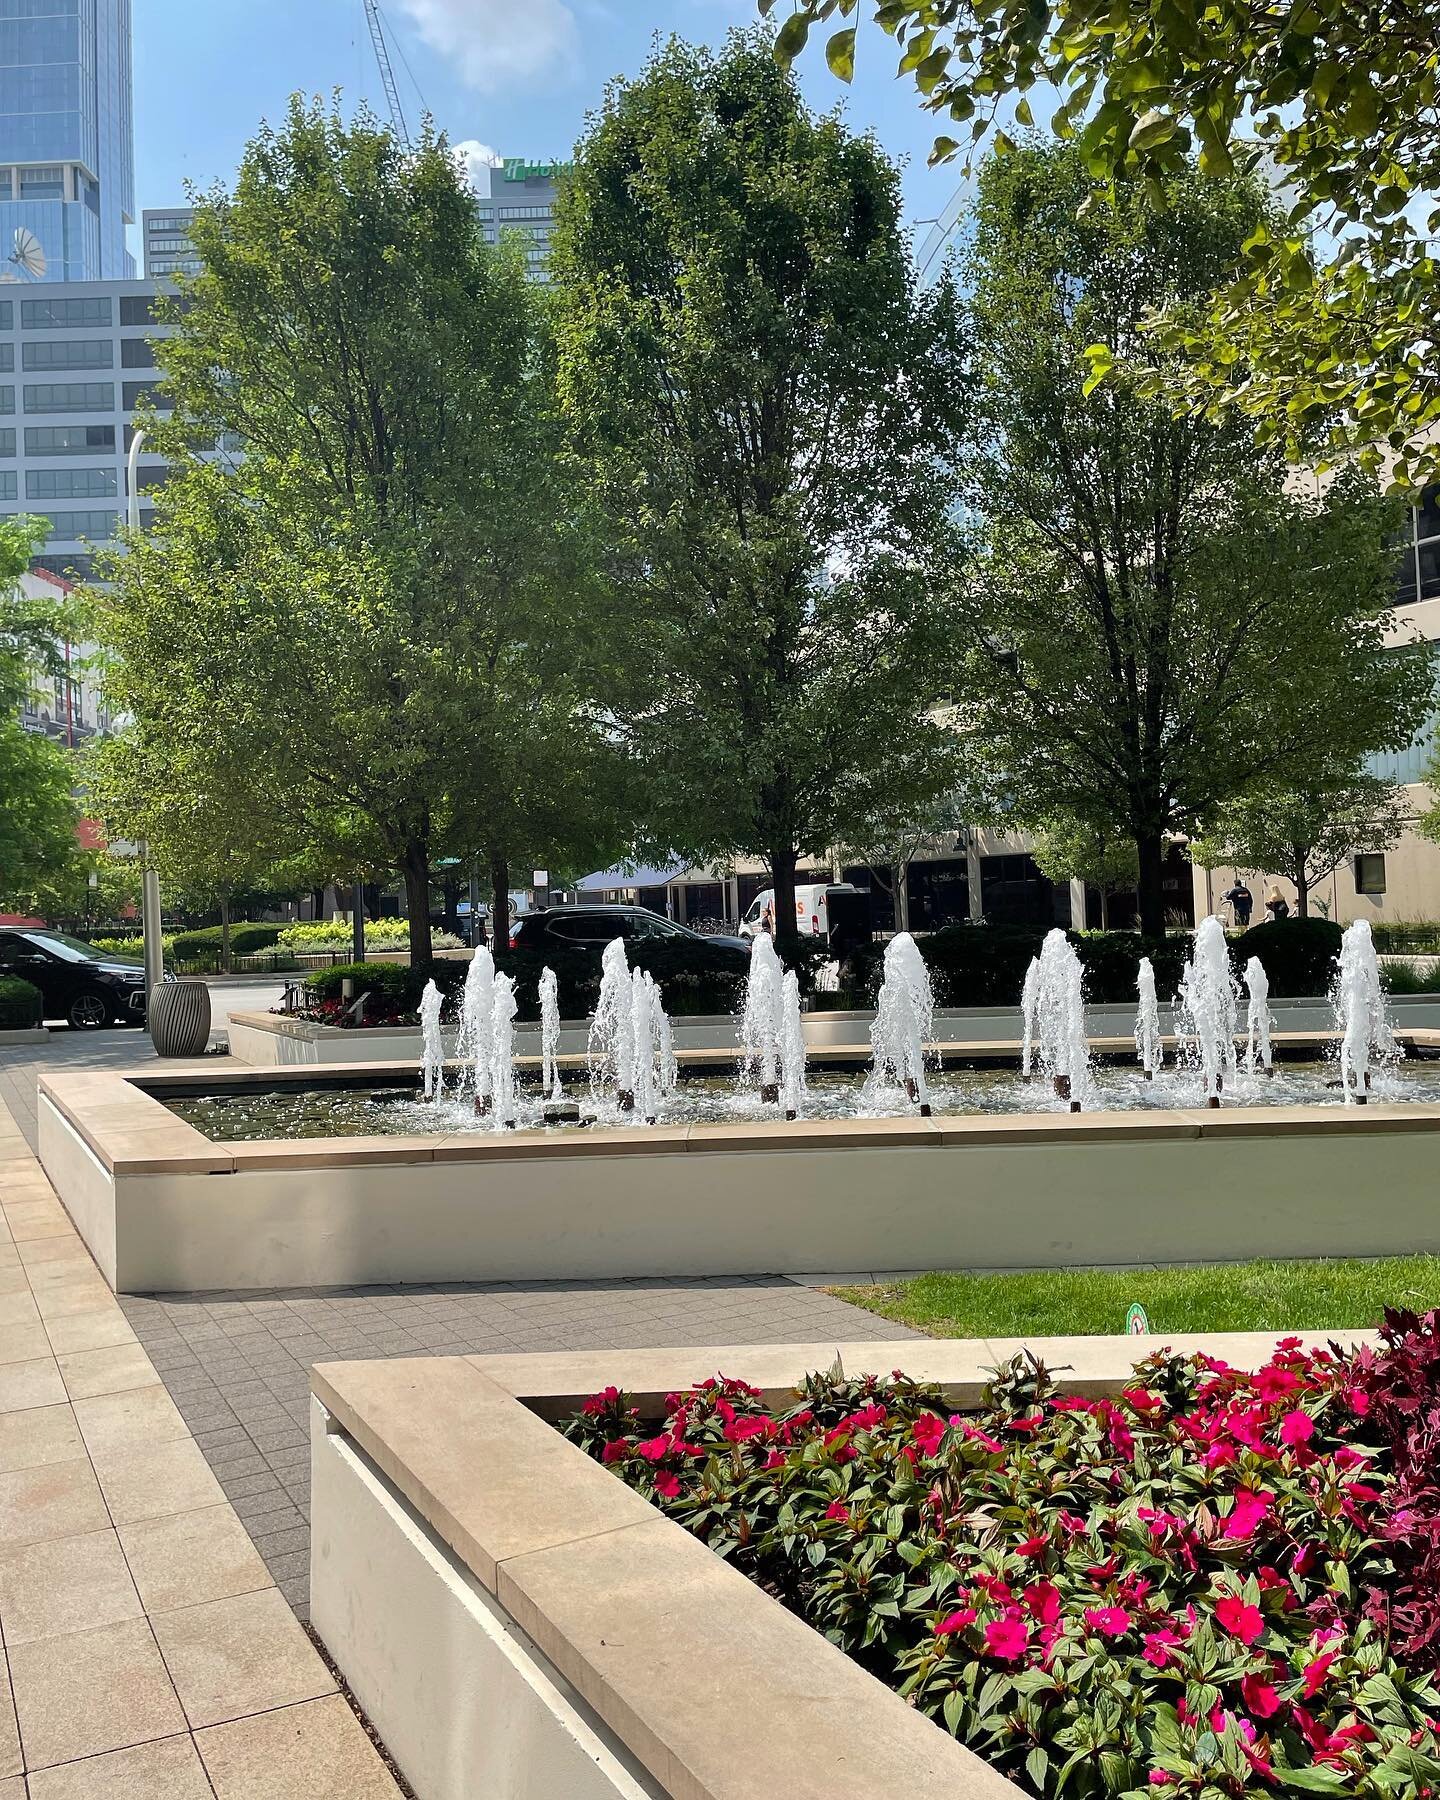 The Hubbard Place has a front-facing landscape that remains fresh and engaging with a 4-season annual rotation!

#christywebber #rivernorthchicago #hubbardplace #hubbardplacechicago #rivernorth #christywebberlandscapes